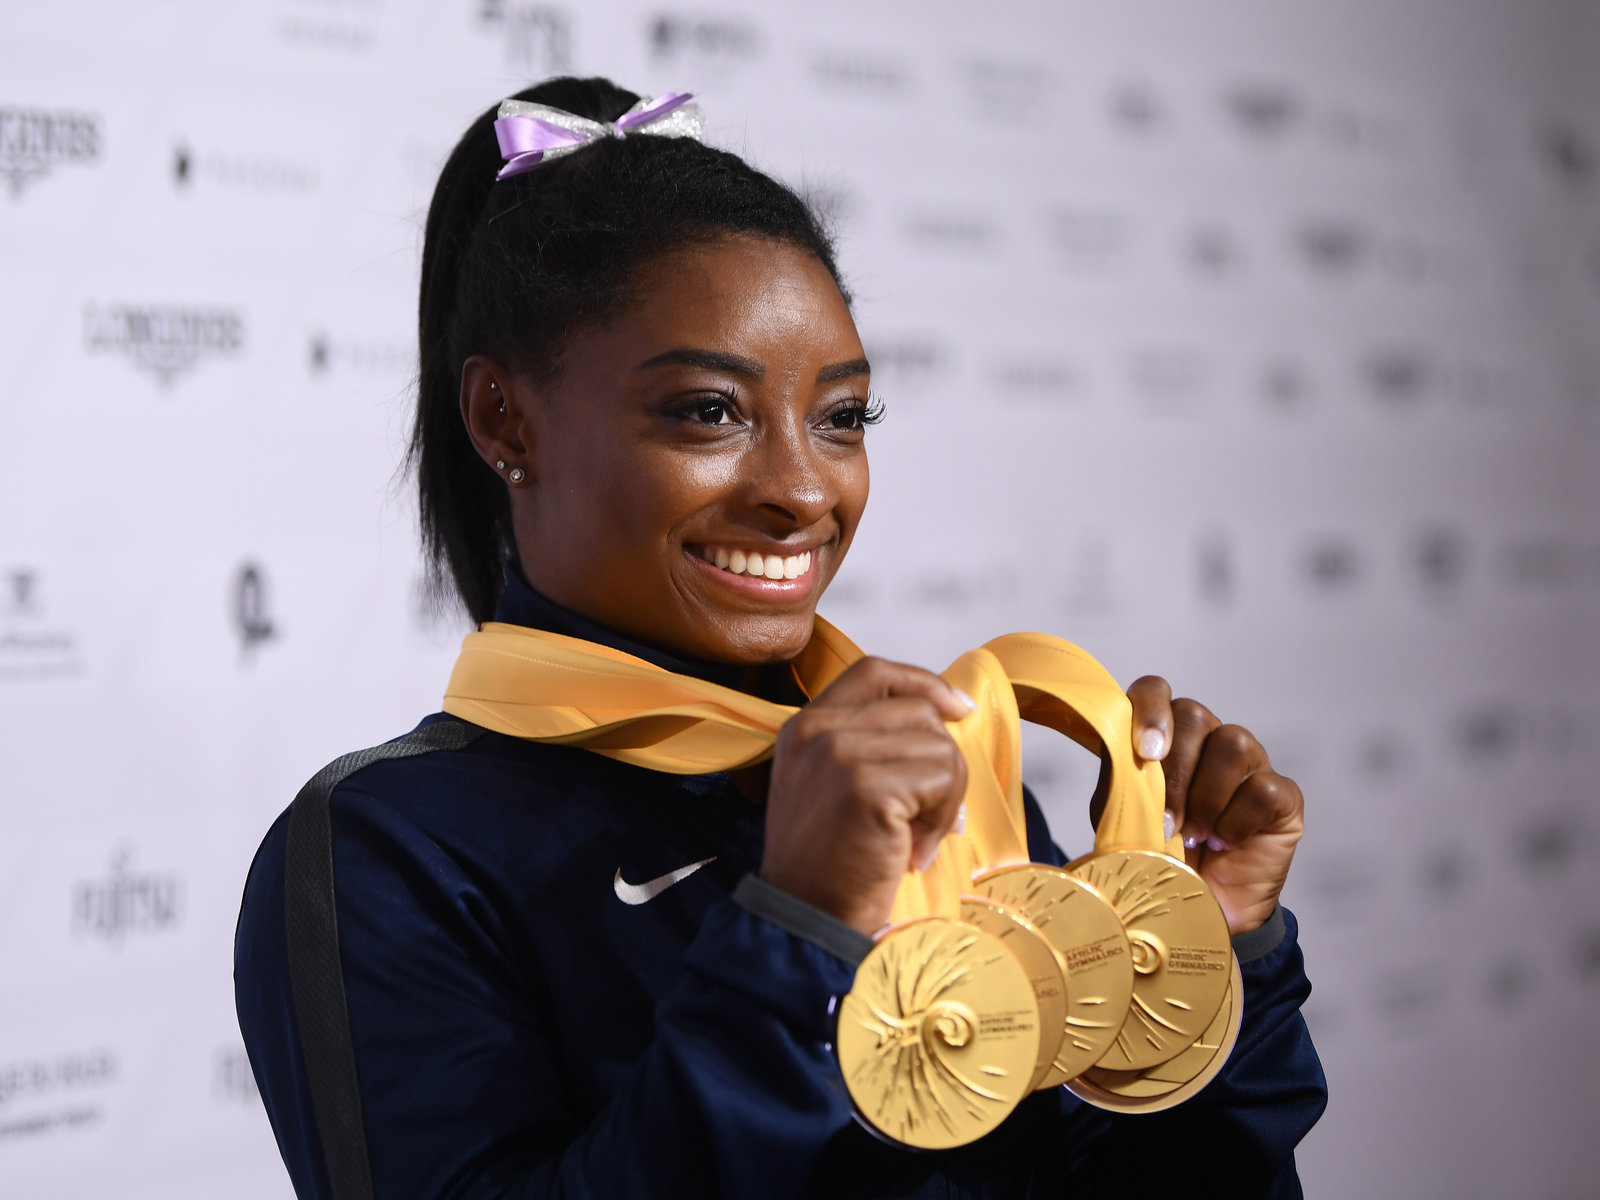 Simone Biles is the greatest gymnast of our time